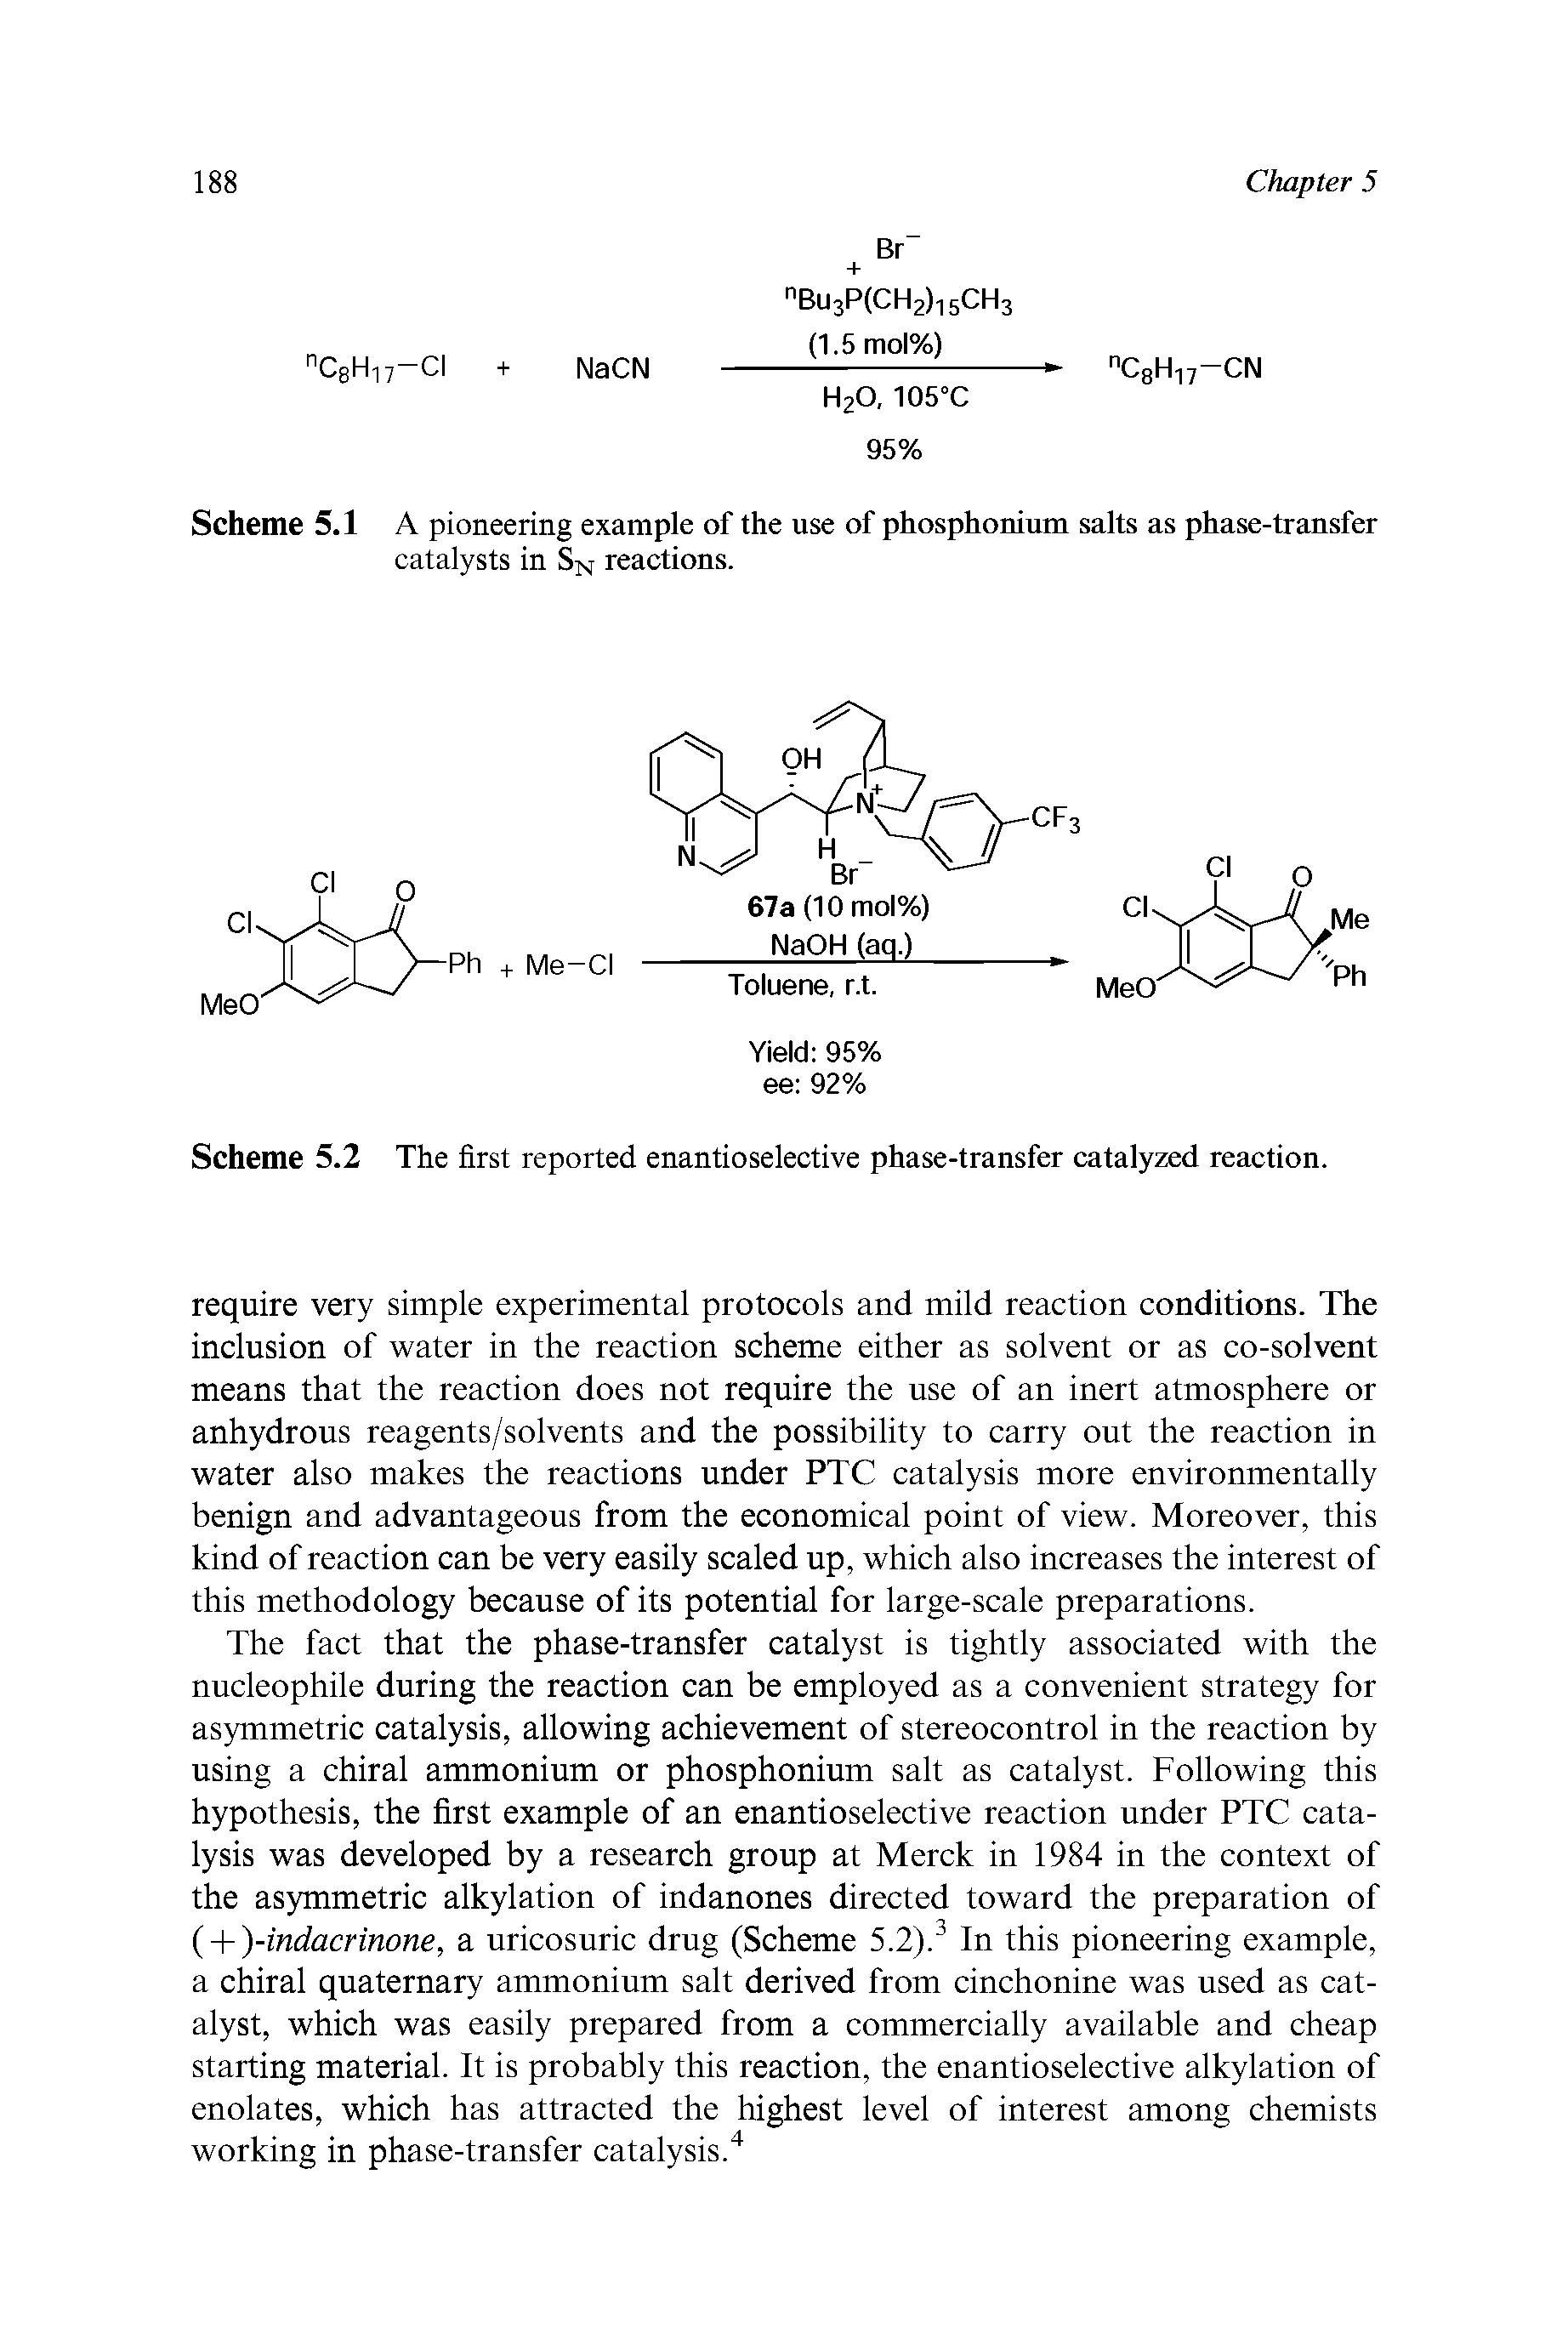 Scheme 5.2 The first reported enantioselective phase-transfer catalyzed reaction.